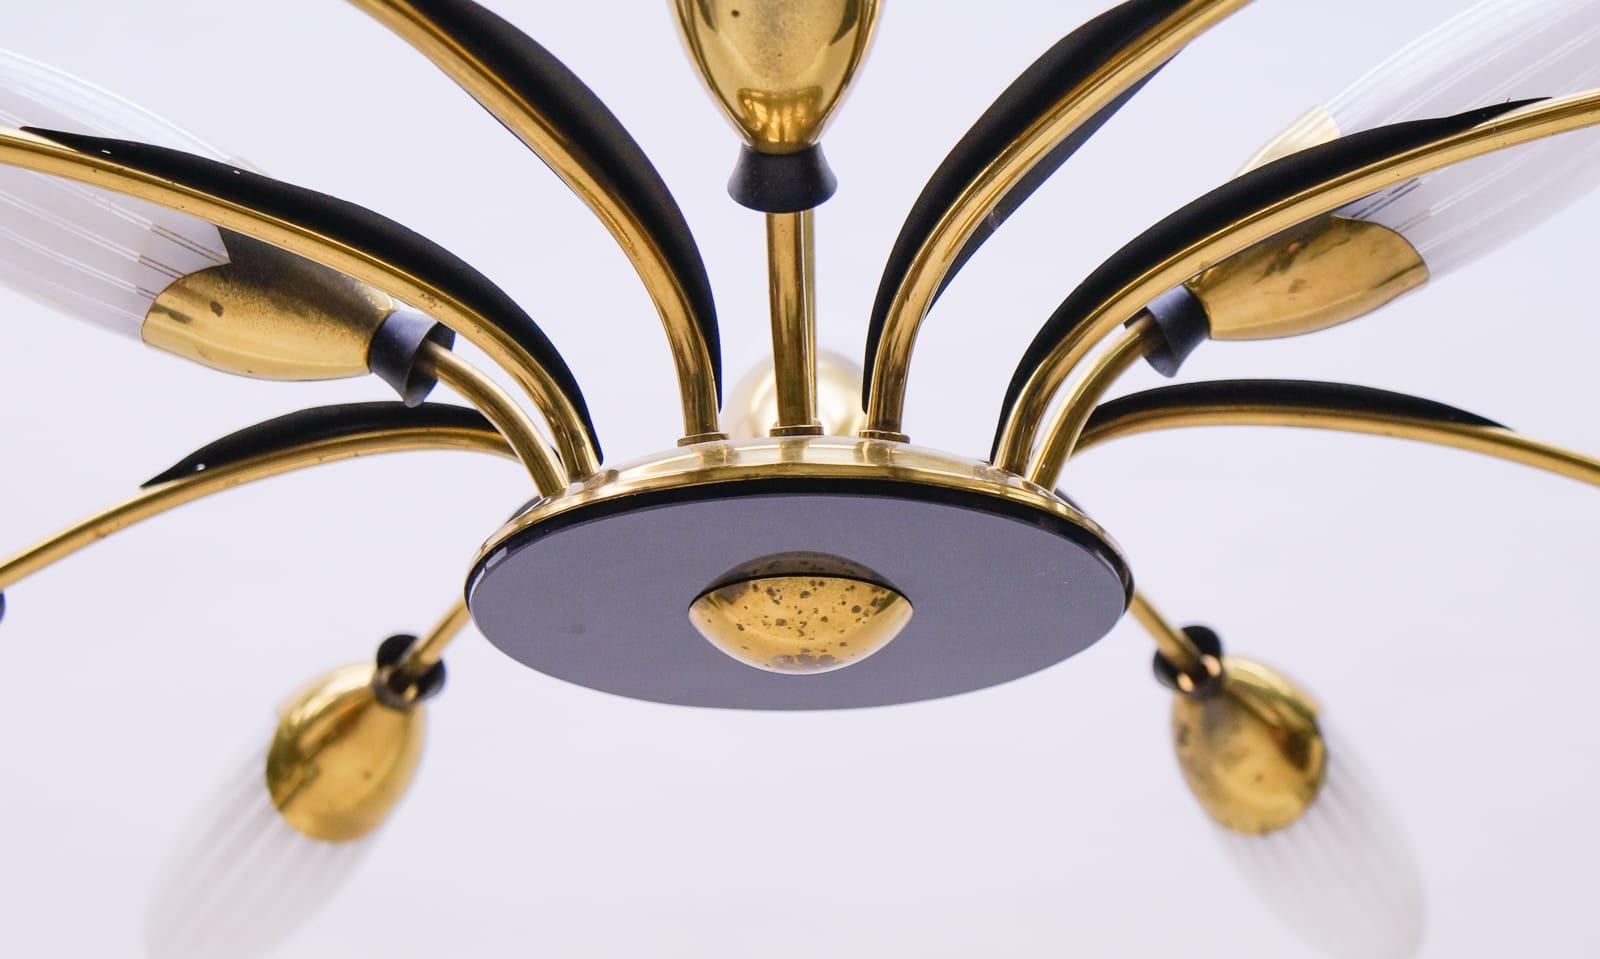 Mid-Century Italian Brass and Glass 12-Arm Sputnik Ceiling Lamp, 1950s For Sale 5